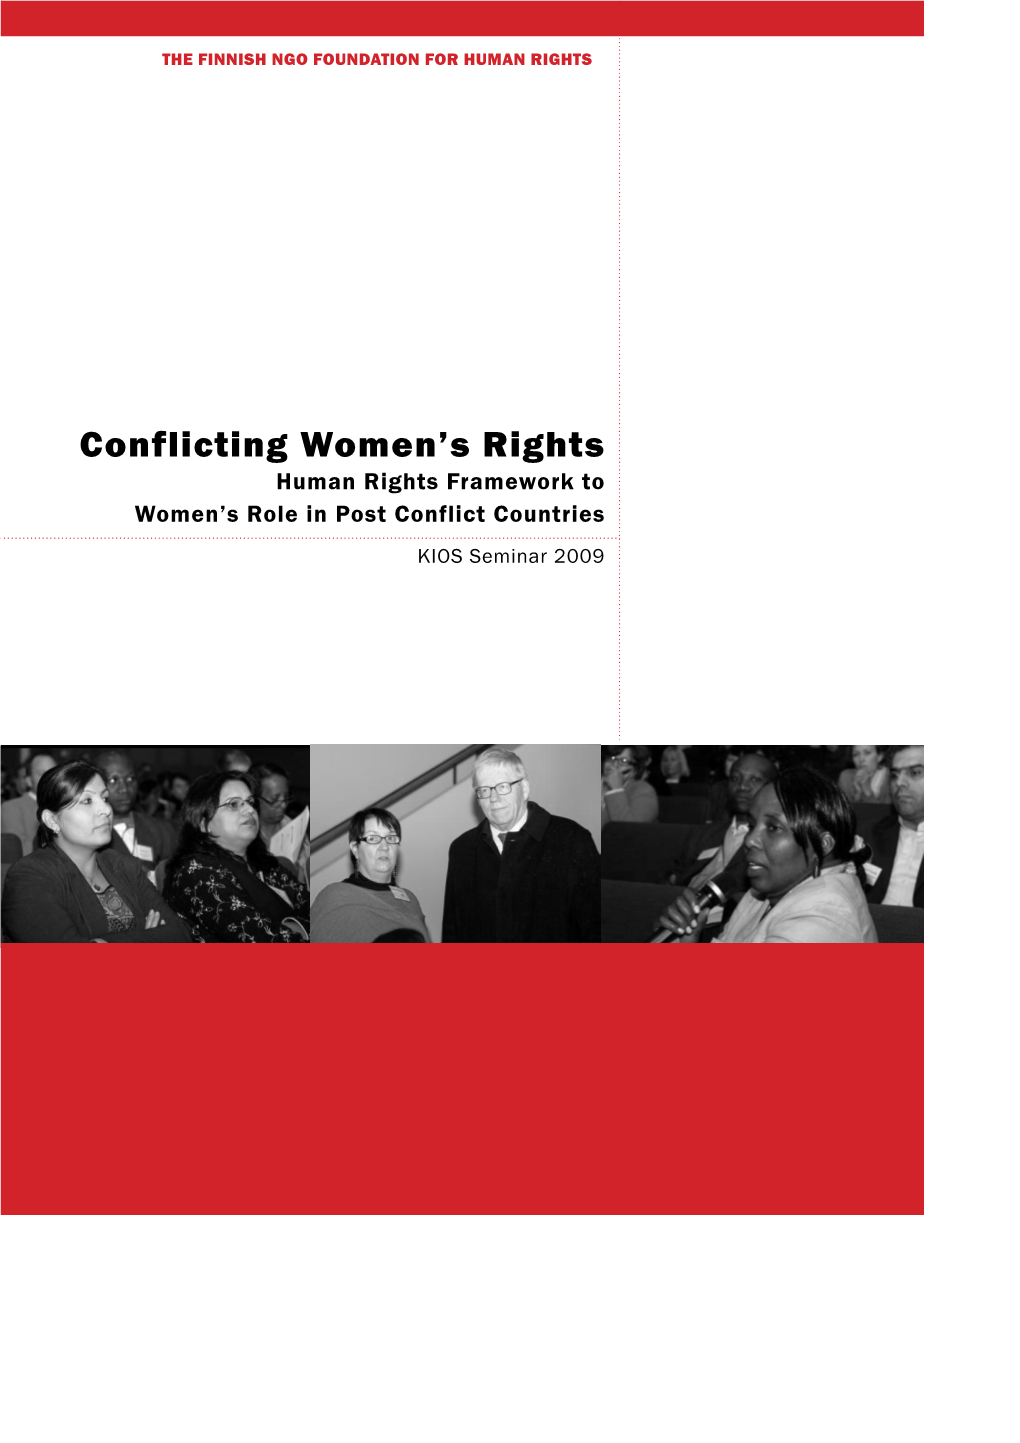 Human Rights Framework to Women's Role in Post Conflict Countries